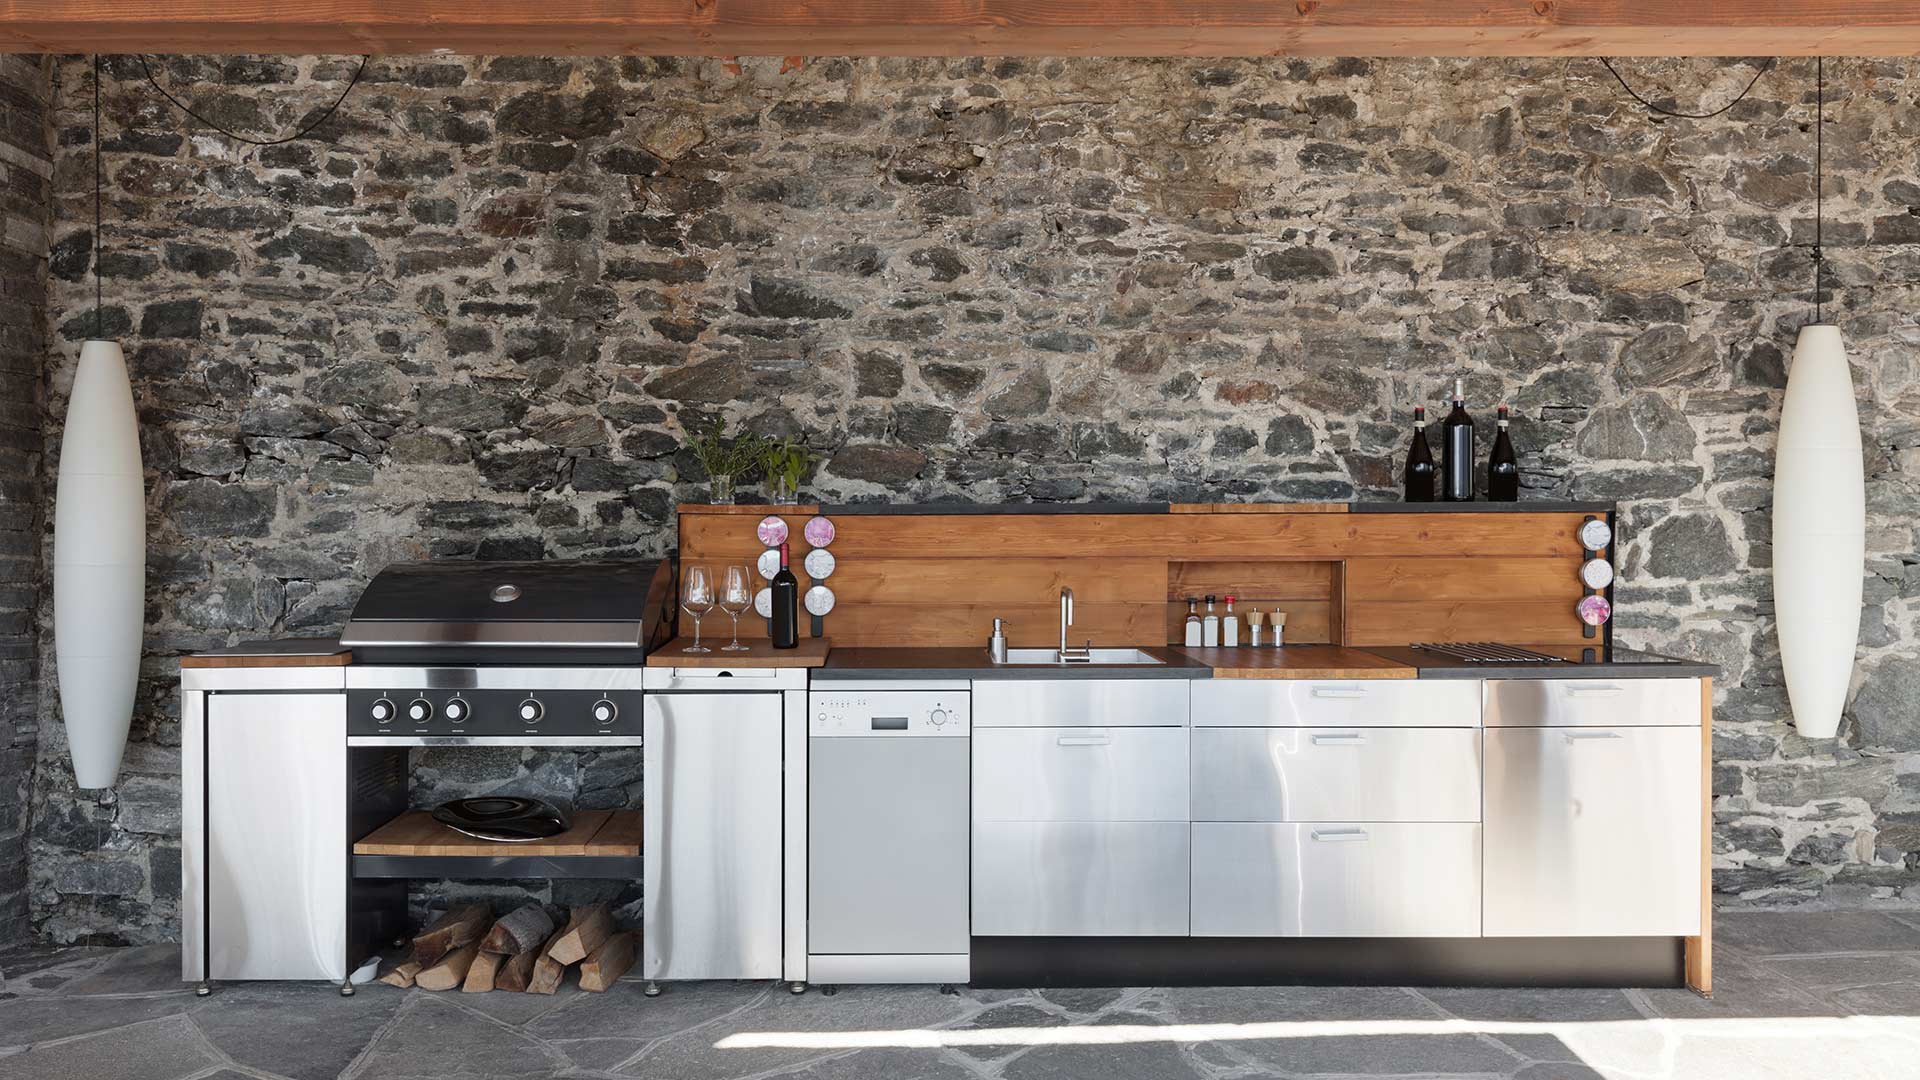 Get the Most Out of Your Outdoor Kitchen by Adding These 5 Features to It